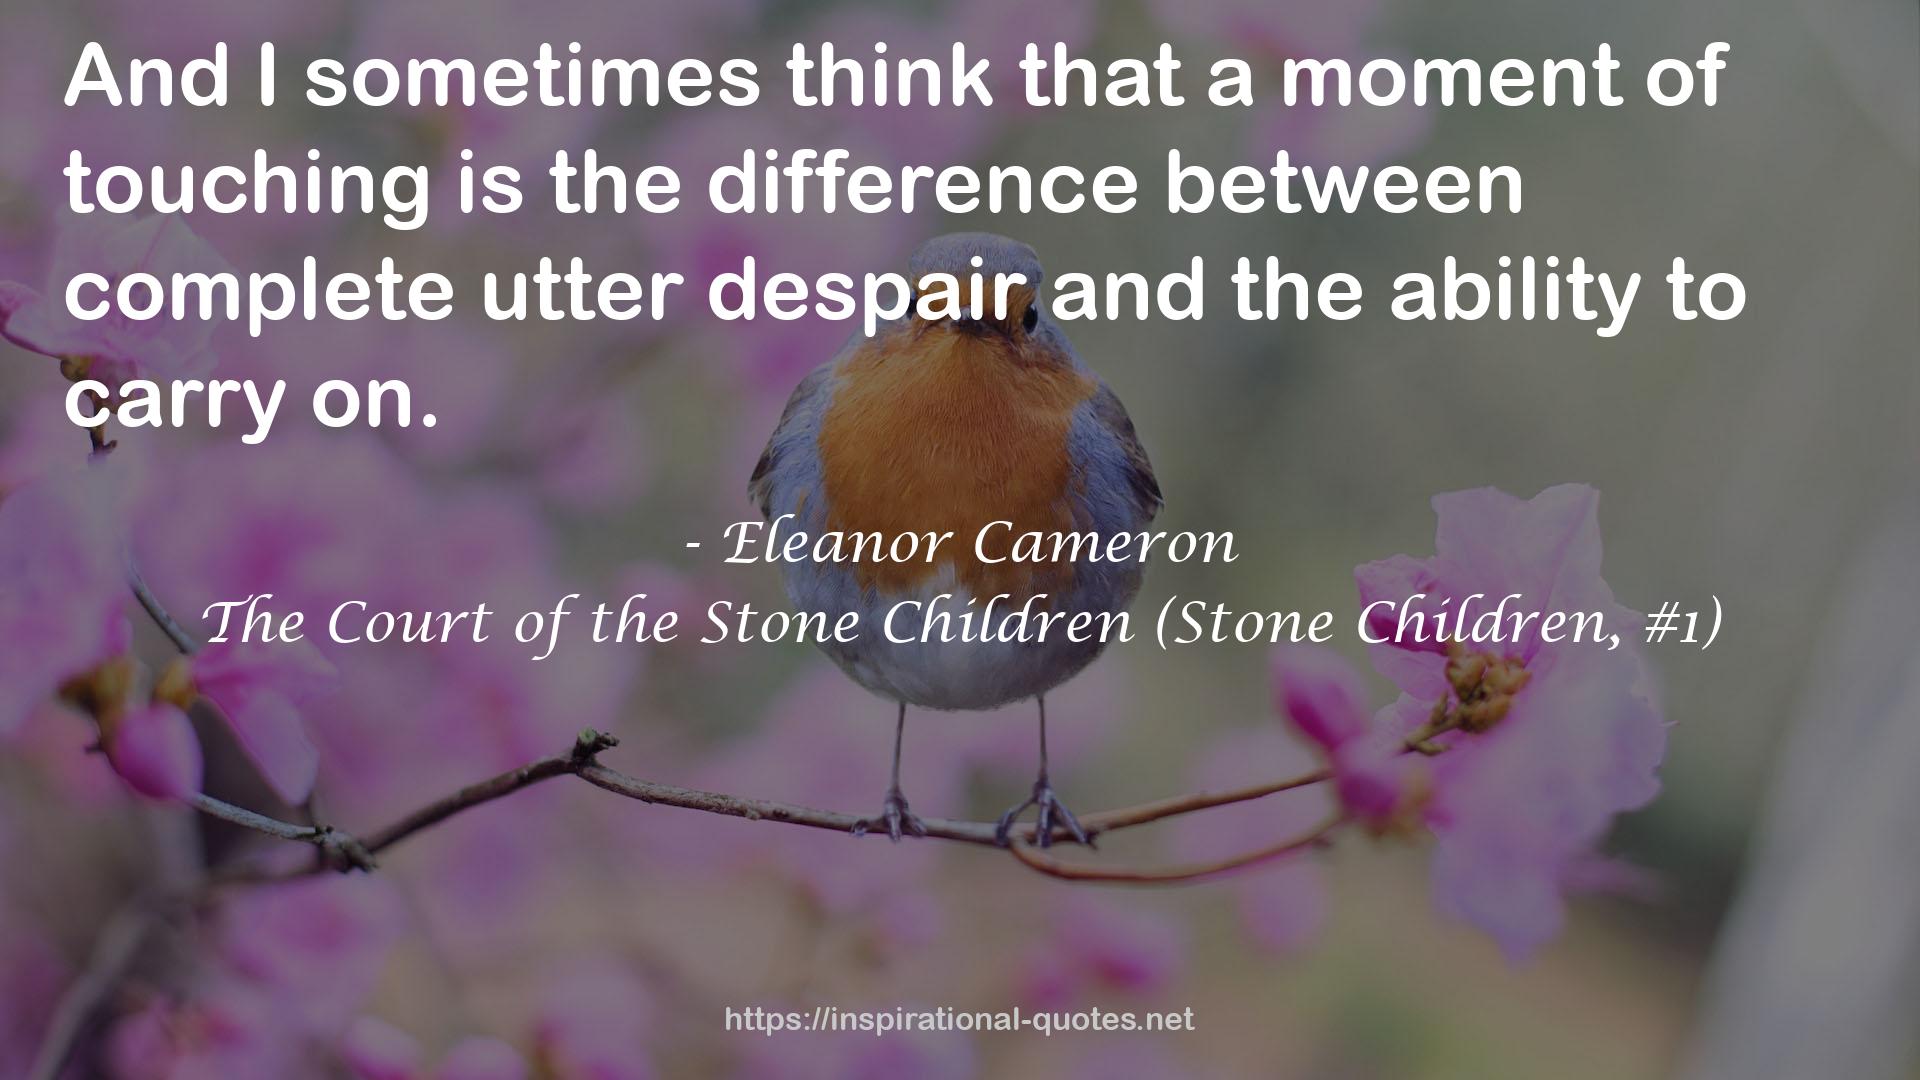 The Court of the Stone Children (Stone Children, #1) QUOTES